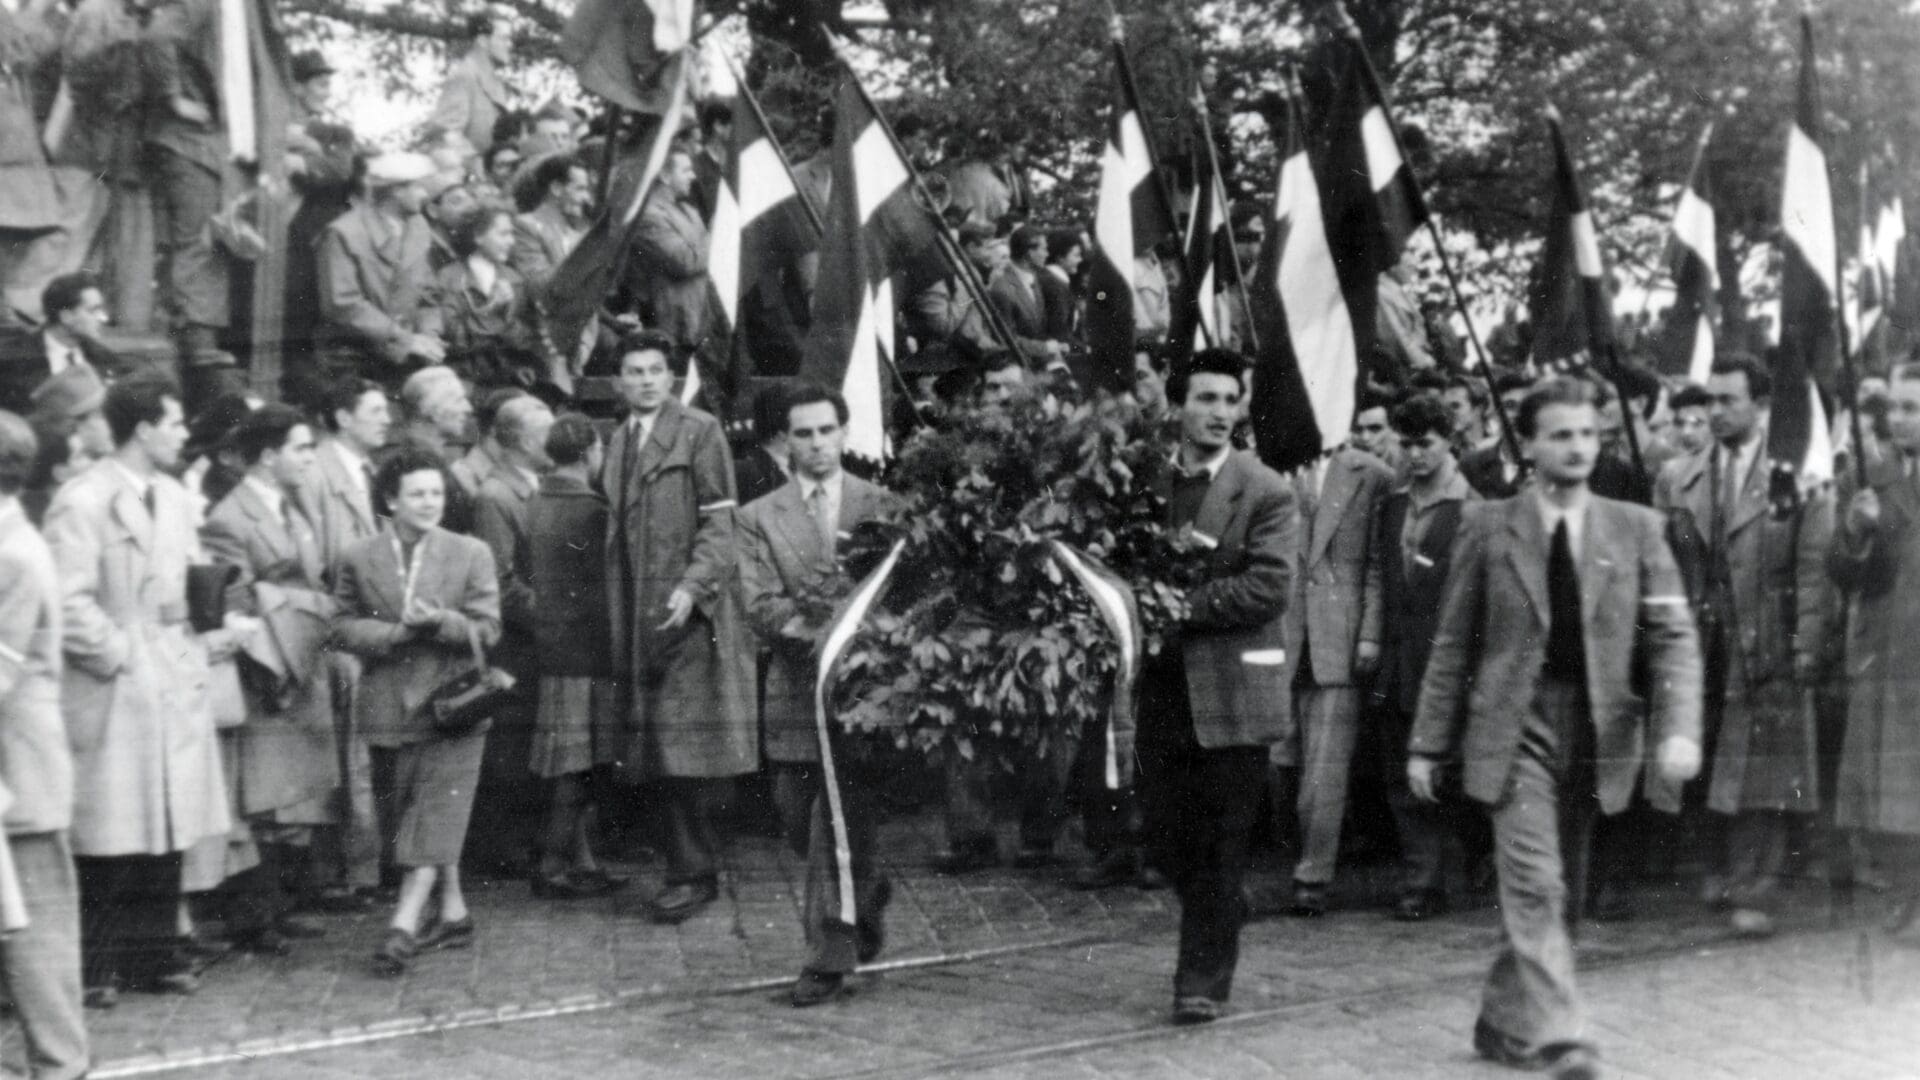 Technical University students marching for freedom arrive at the Bem statue in Budapest on 23 October 1956.